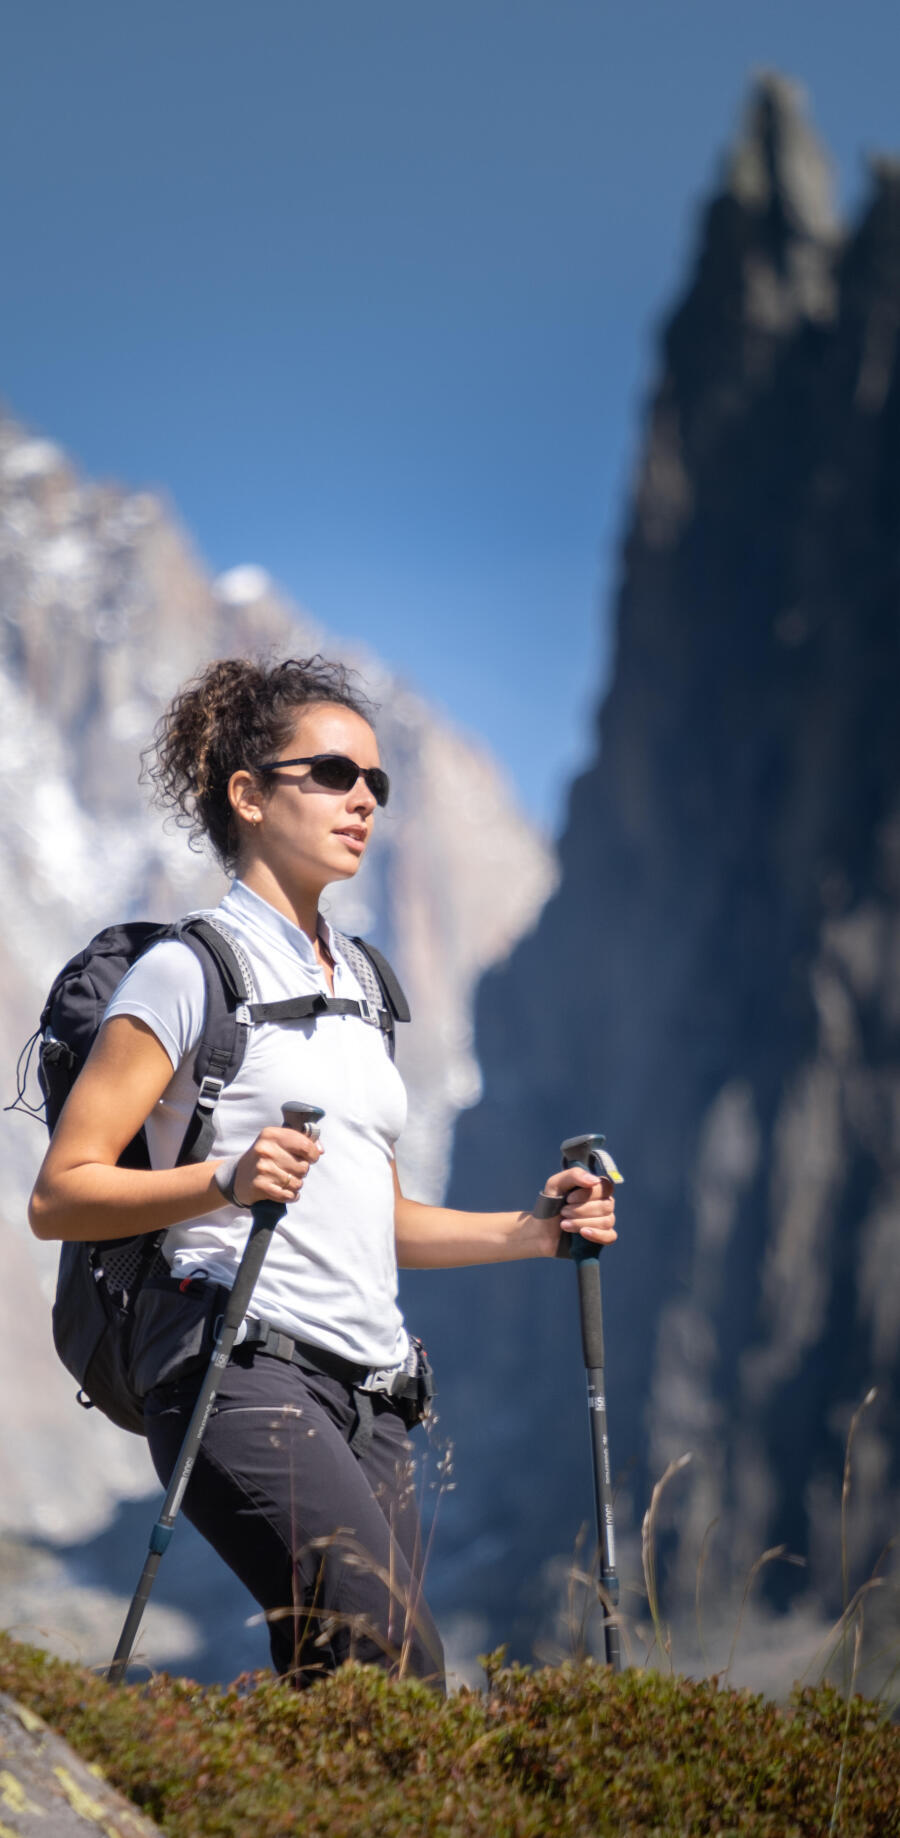 Hiking With Glasses: Tips For Hikers With Prescription Lenses